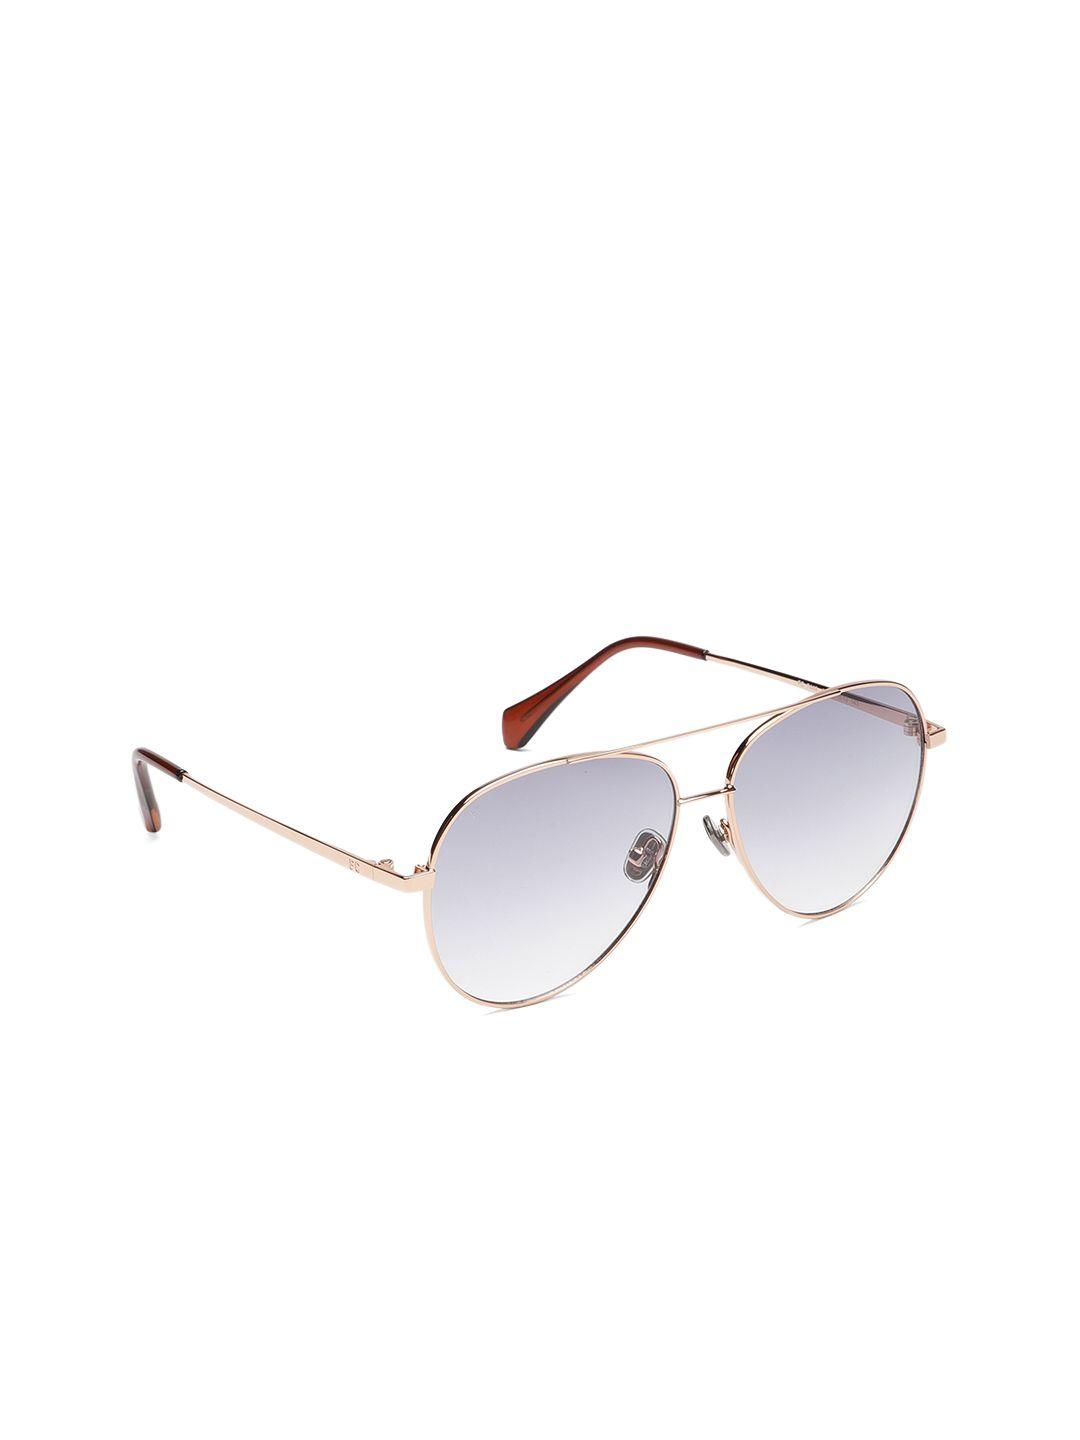 french connection unisex grey lens & rose gold-toned aviator sunglasses  fc 7448 c1